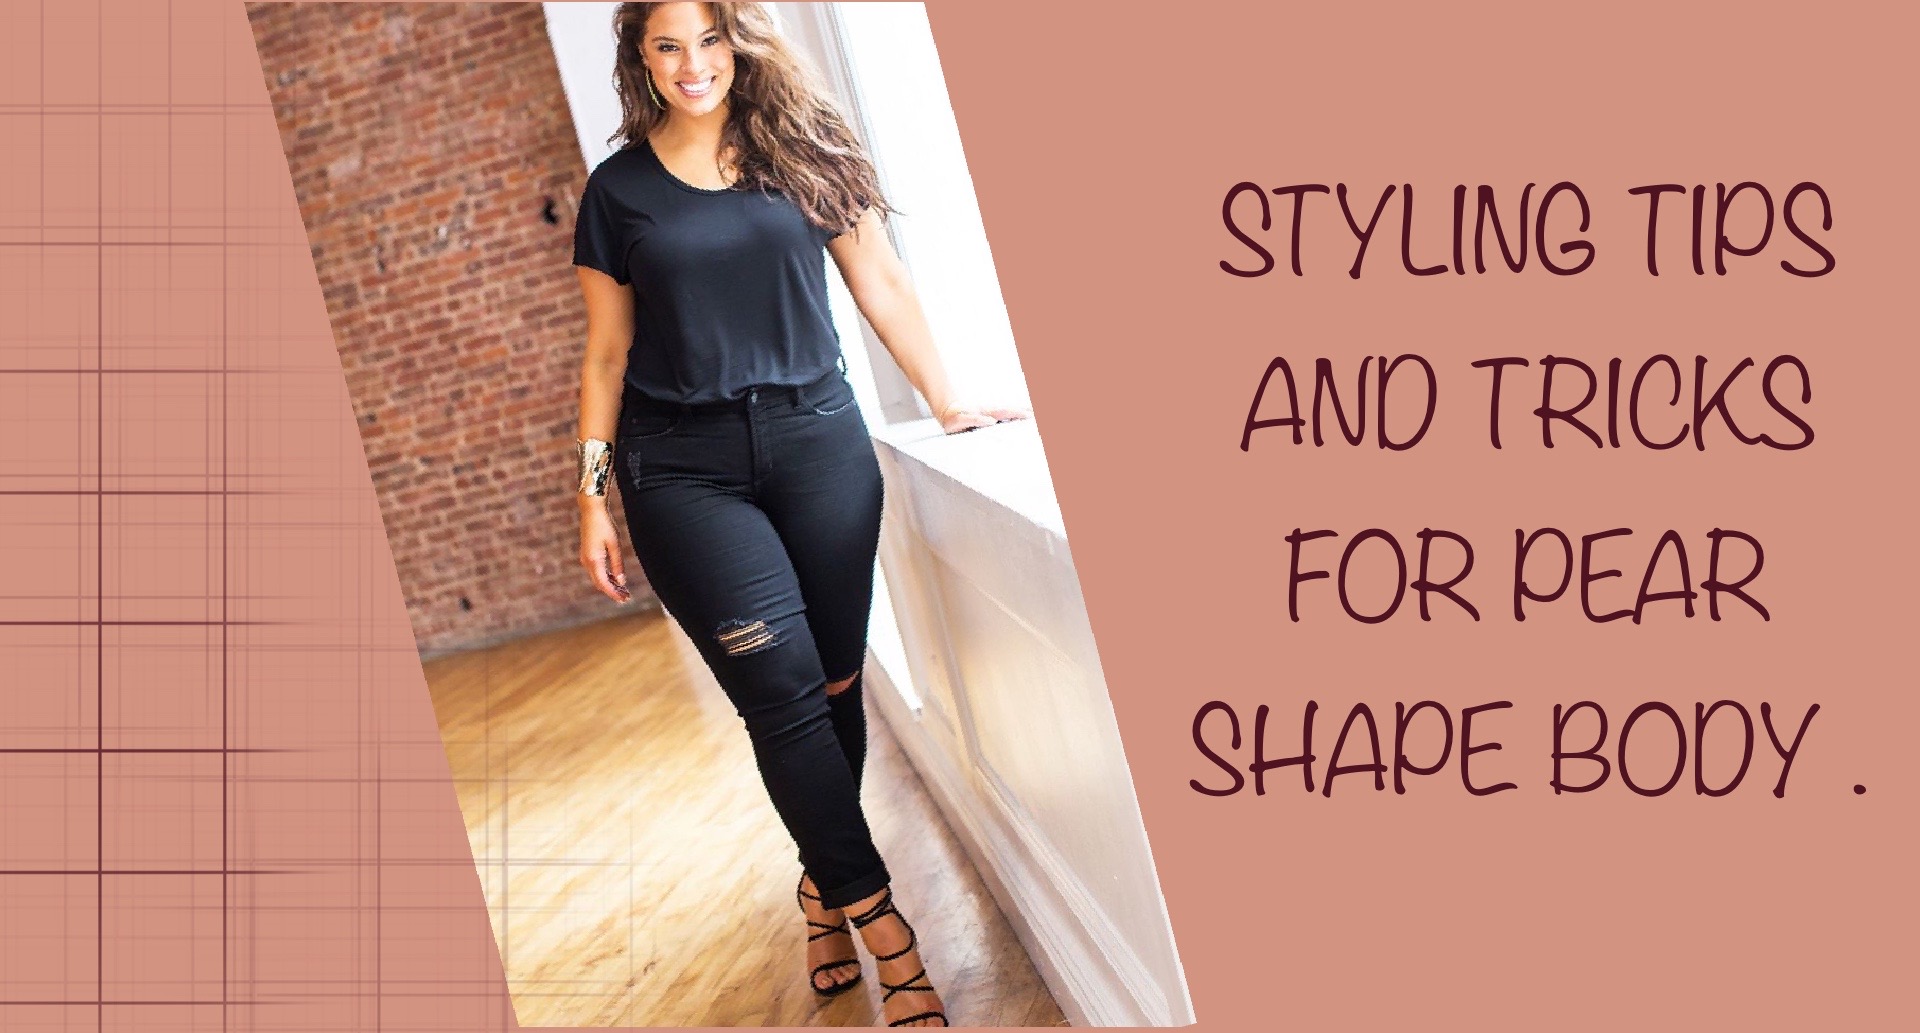 What Are The Best Work-Wear Ideas For Pear-Shaped Body Type